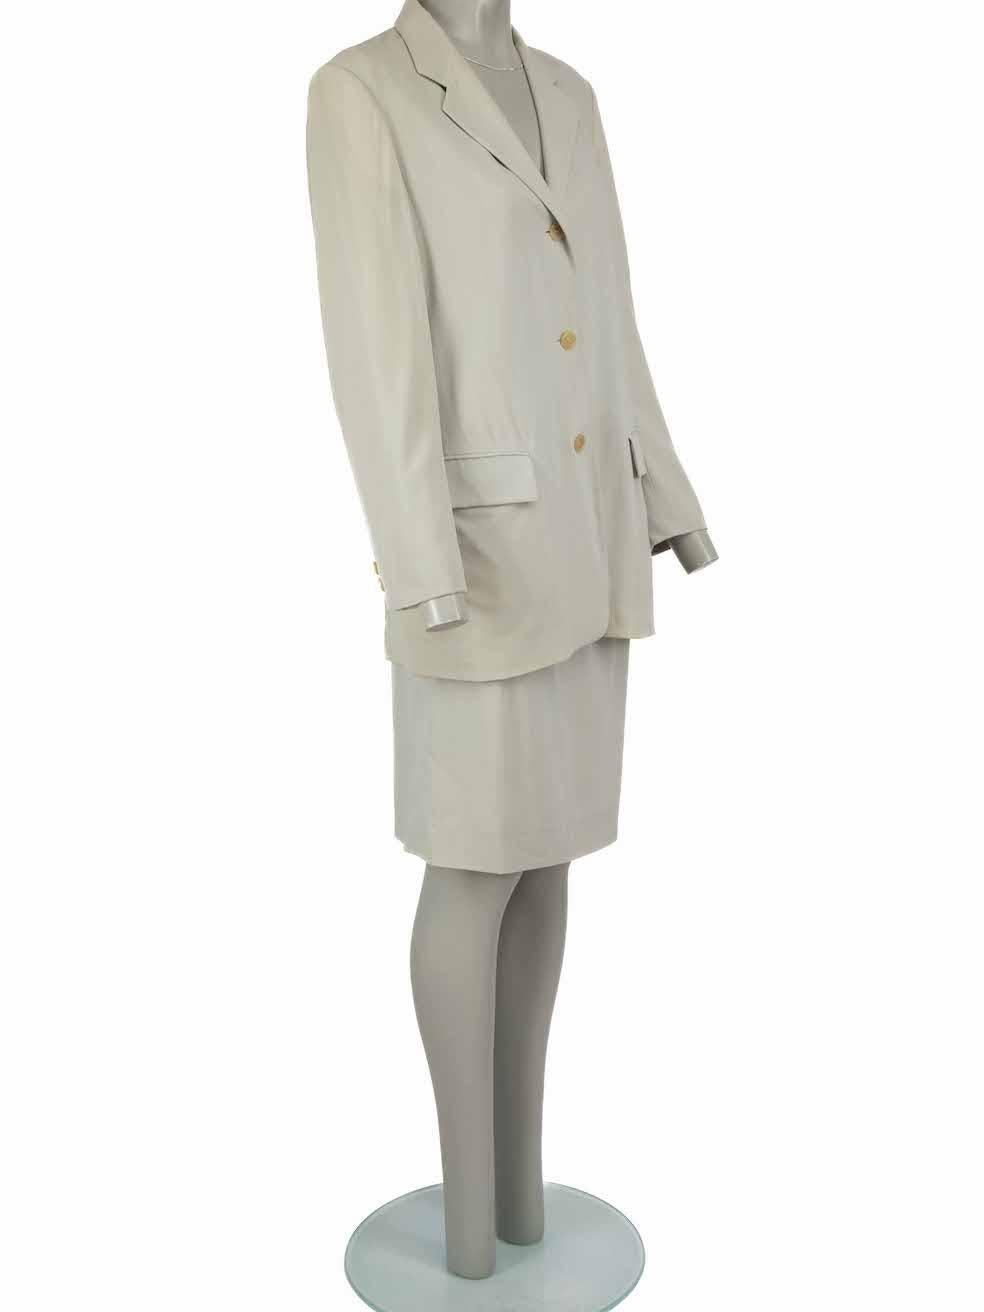 CONDITION is Good. Minor wear to suit is evident. Light pen mark to the centre front of skirt and small pull thread on front waistband. A small rip to back slit on this used Jil Sander designer resale item.
 
 Details
 Grey
 Wool
 Skirt suit set
